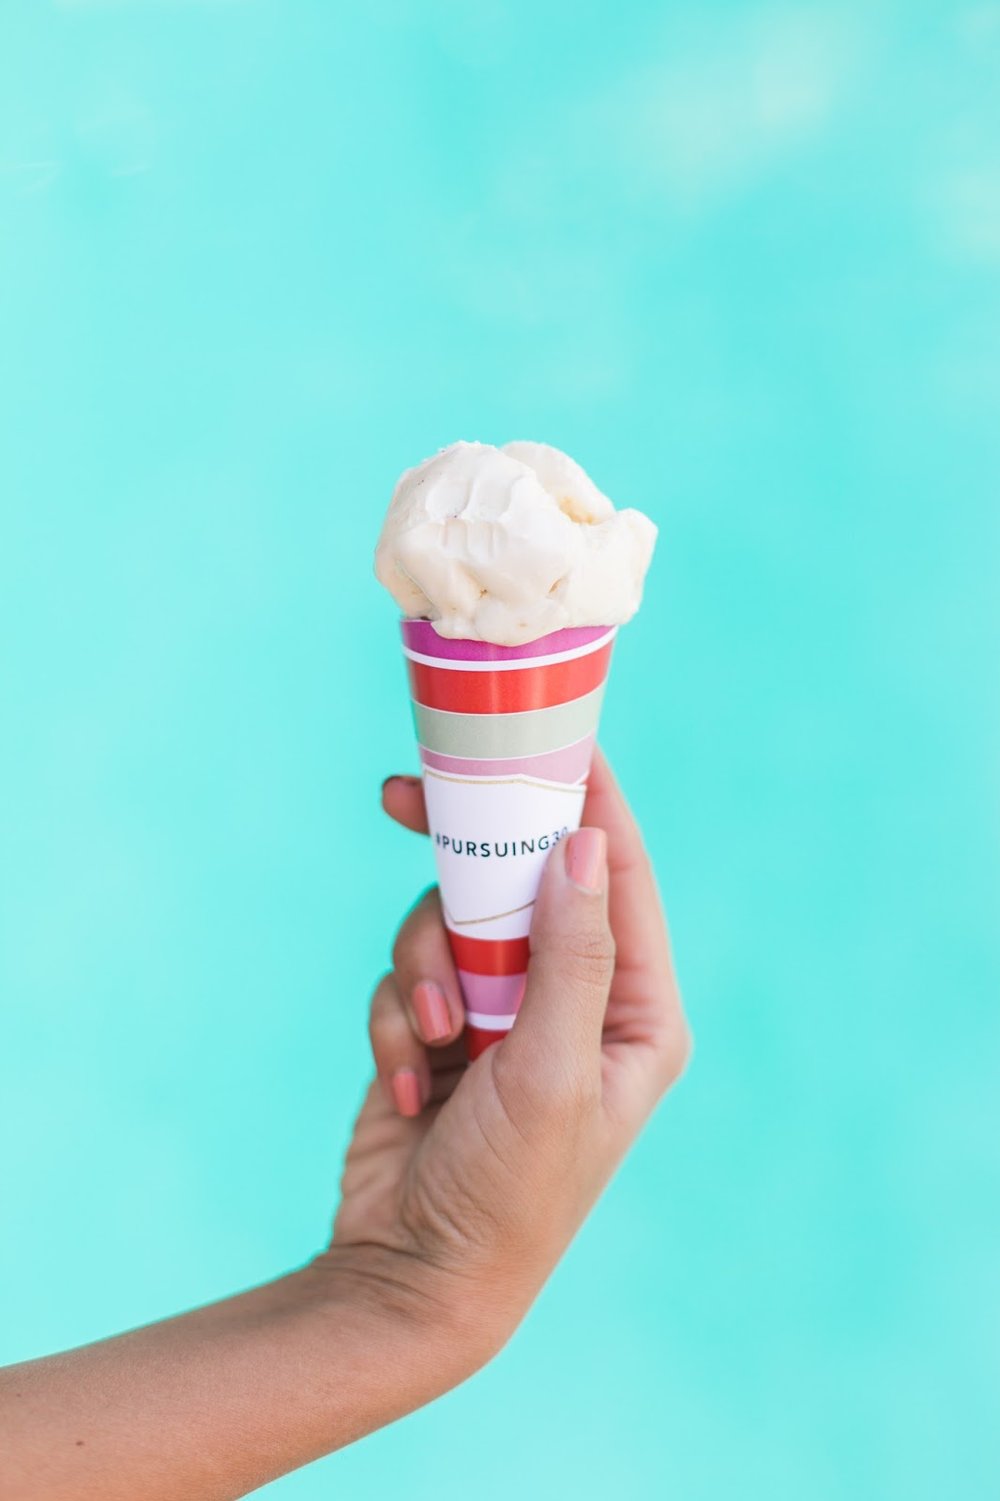 palm springs birthday, personalized ice cream cone, birthday party ideas, pursuit of shoes